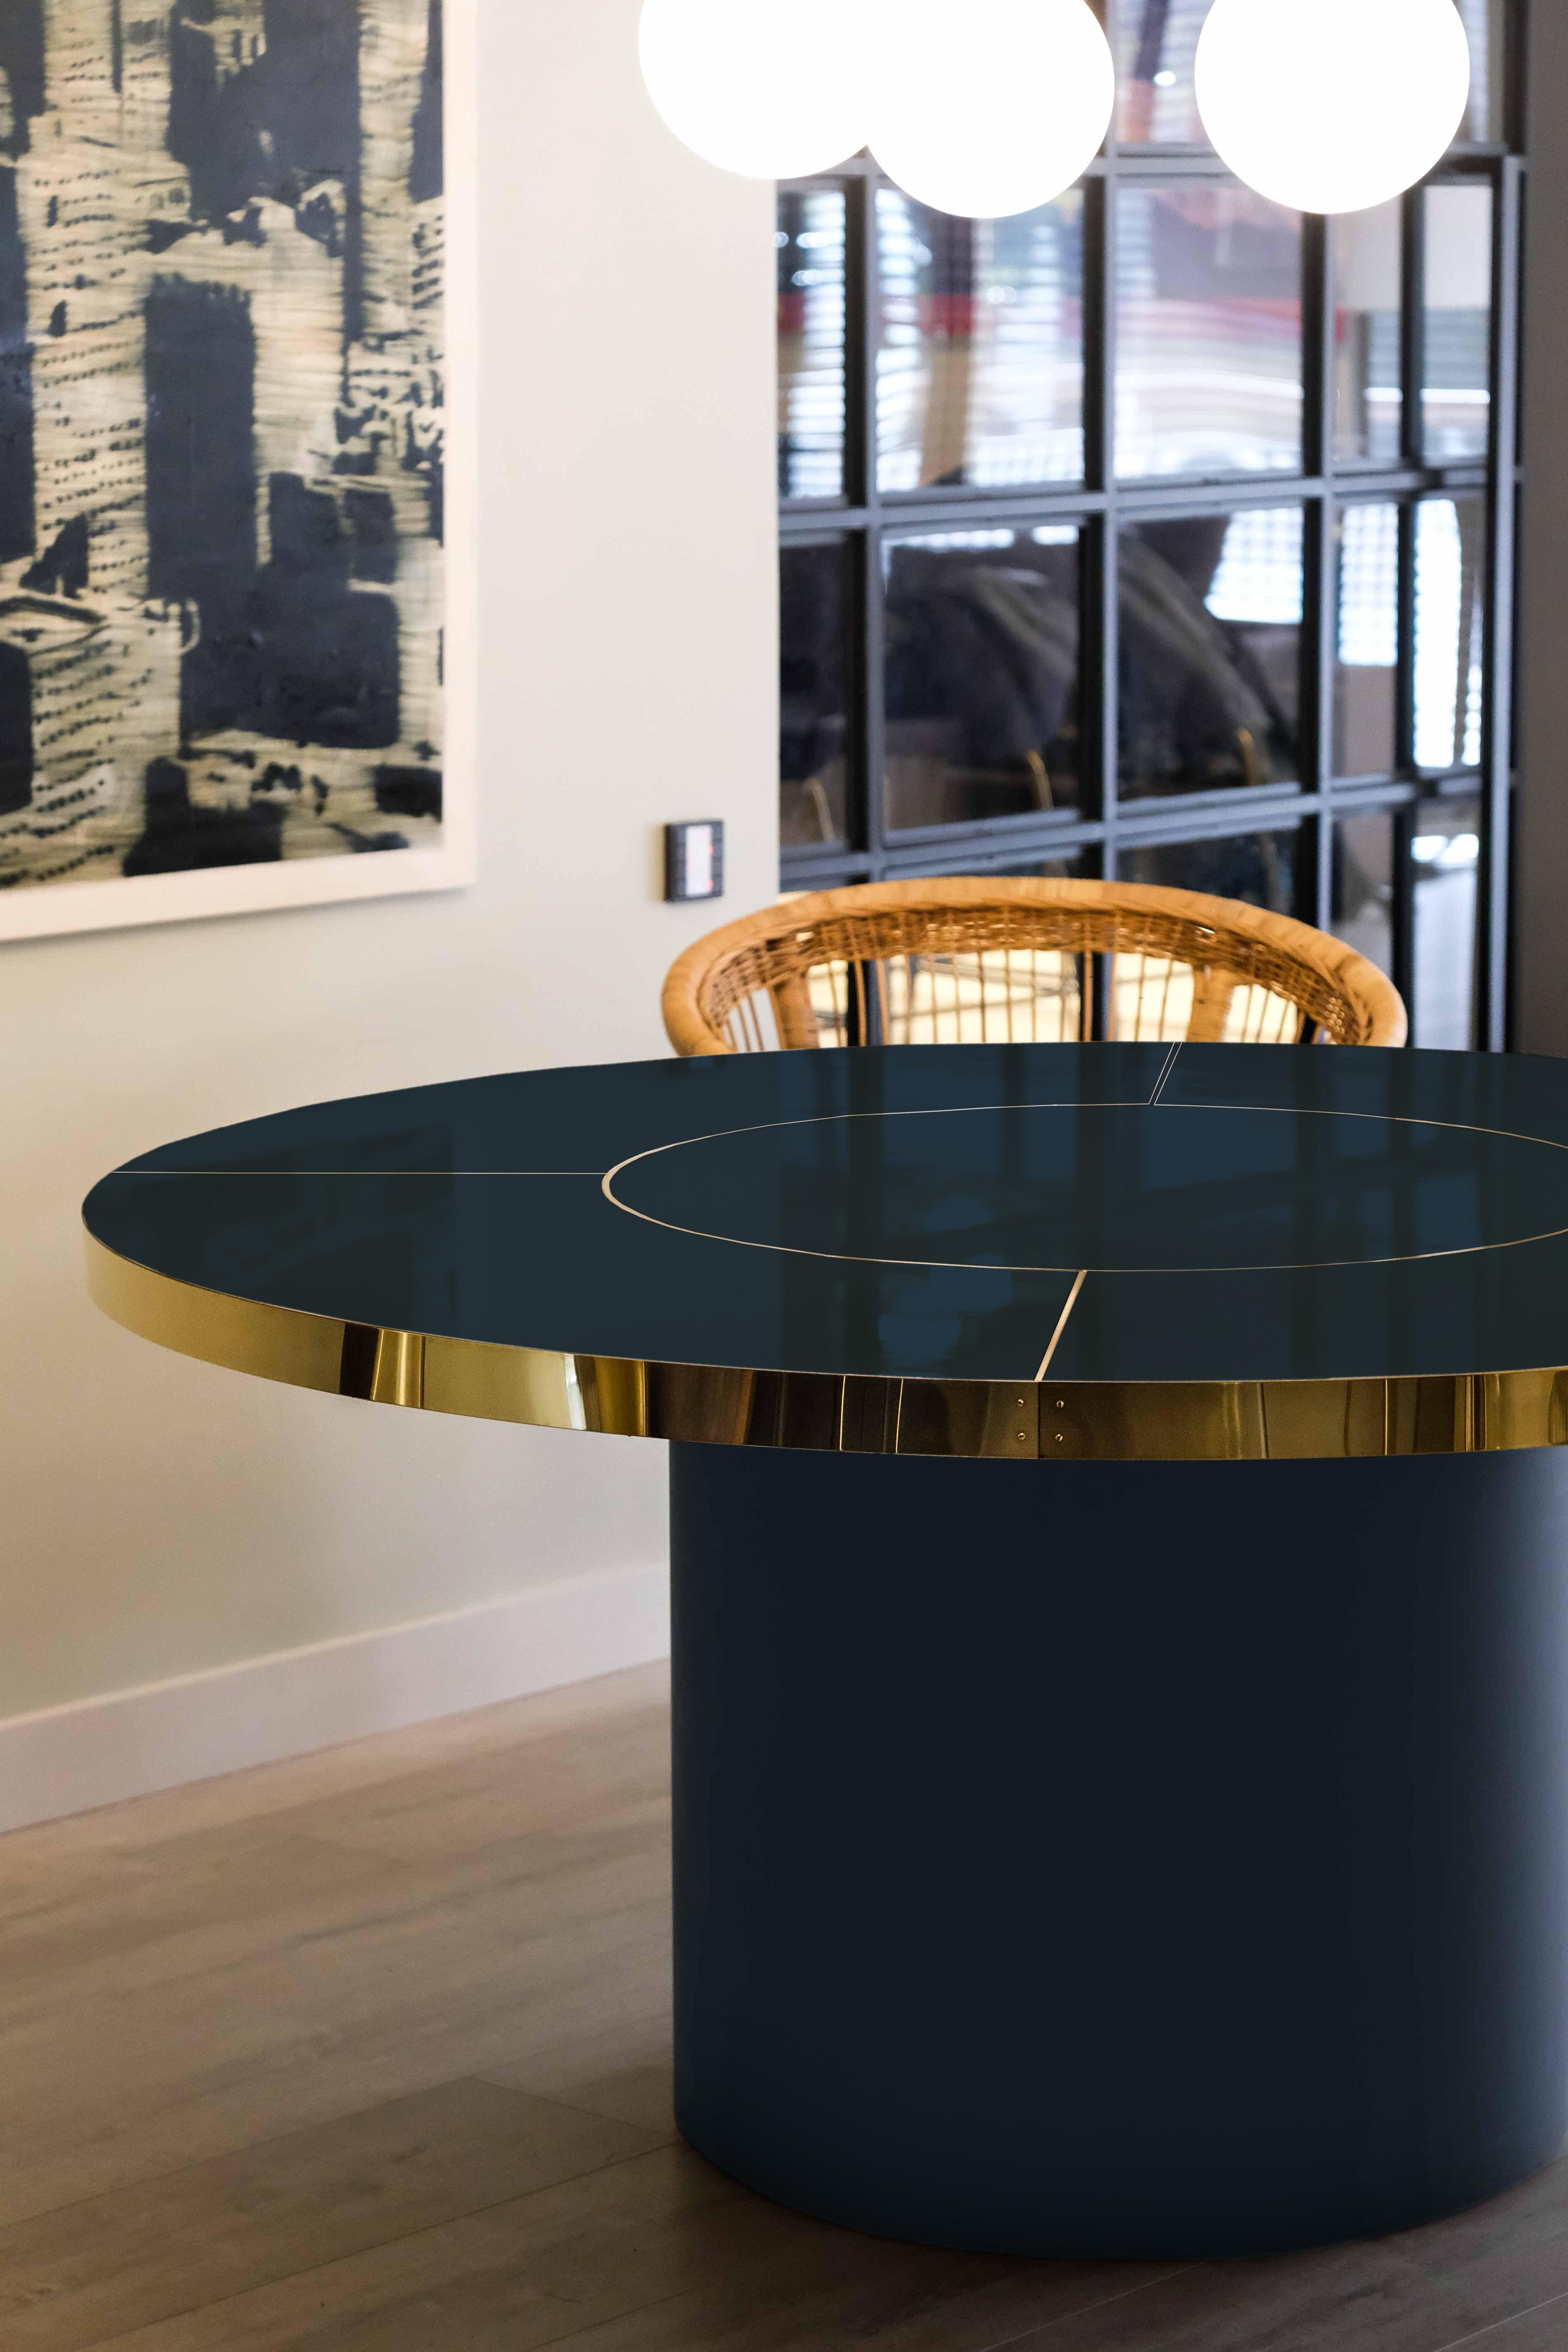 Retro Design Round Dining Table Palm Springs Style High Gloss Laminated&Brass L For Sale 3